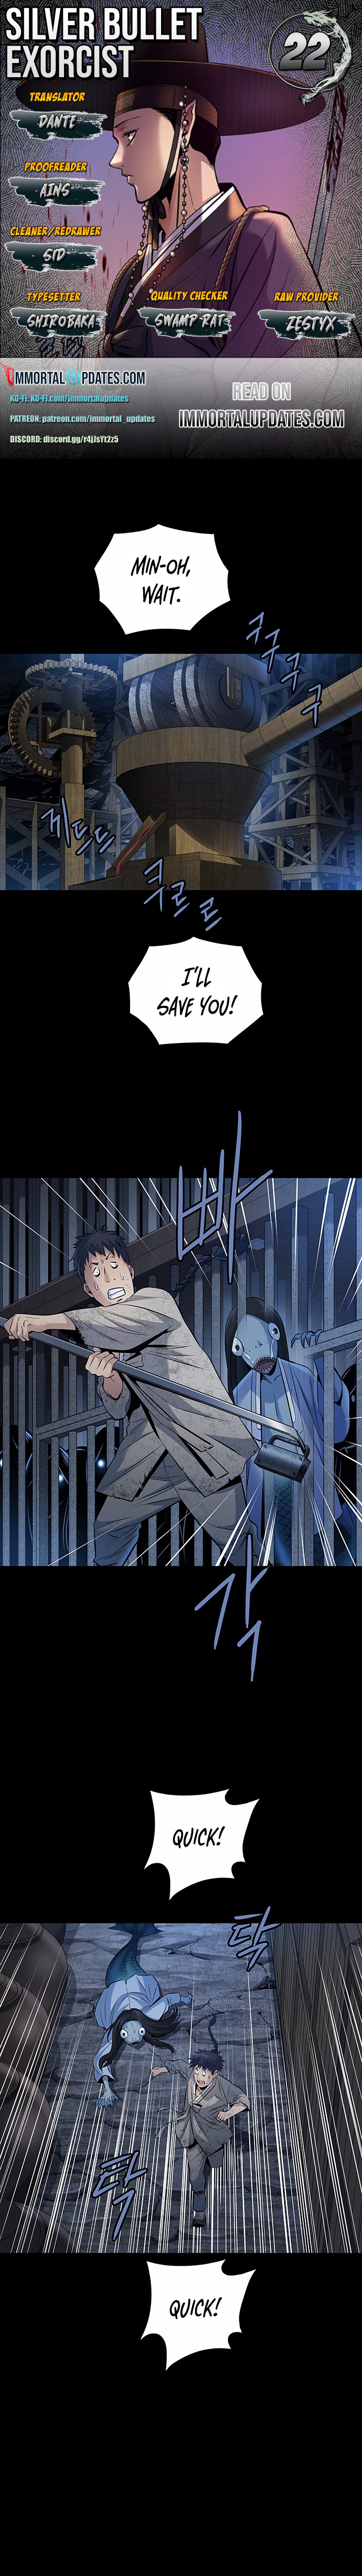 Silver Bullet Exorcist - Page 1